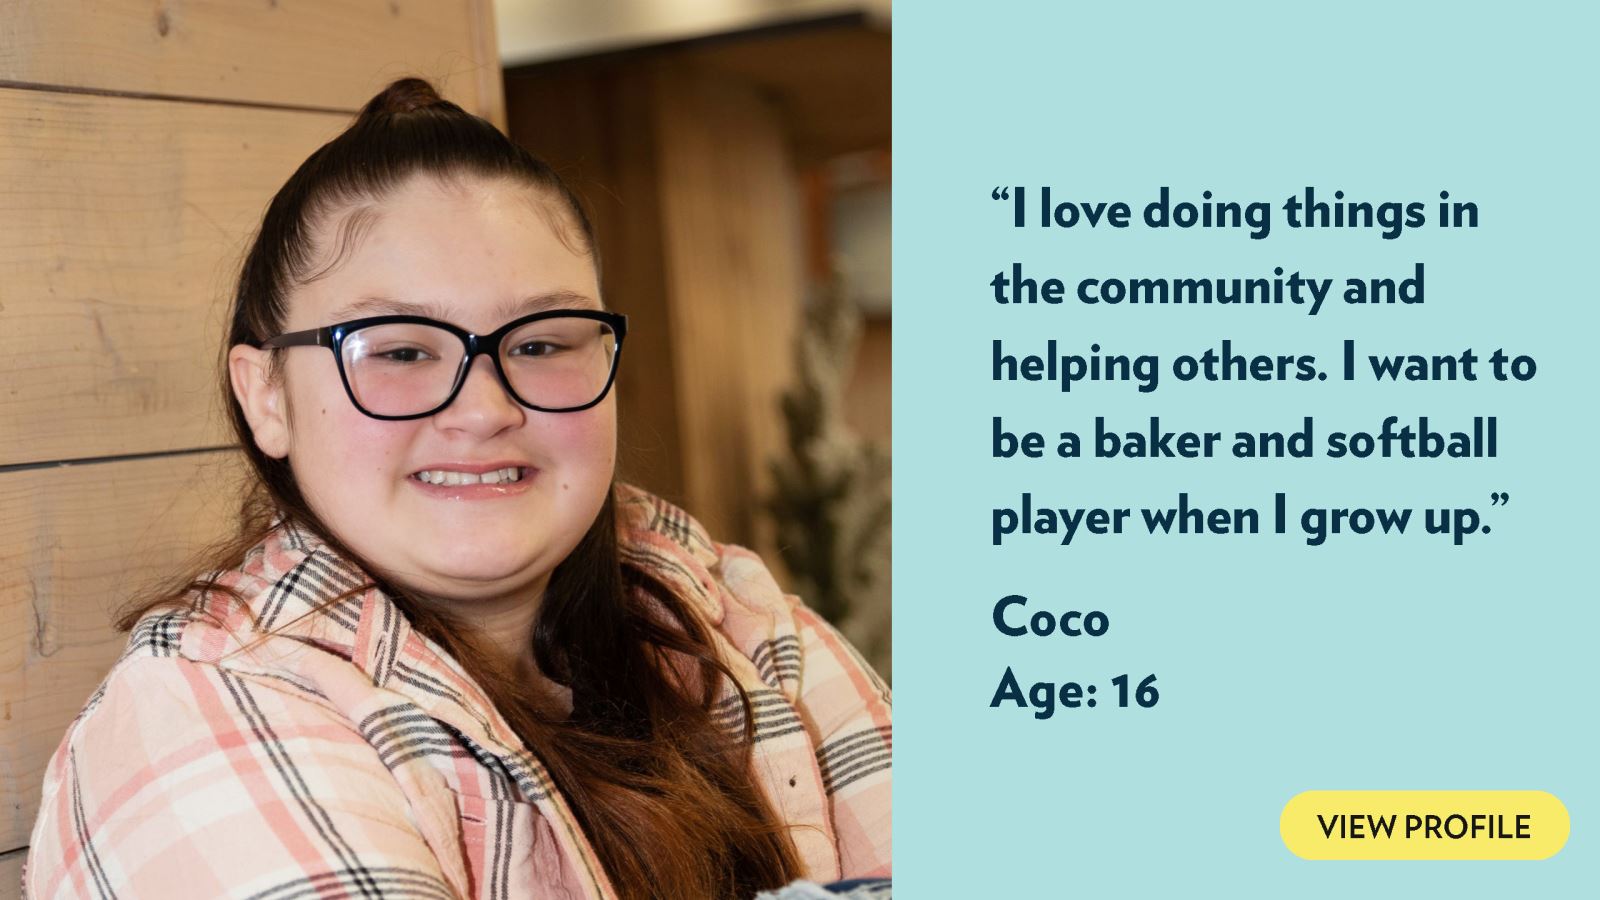 I love doing things in the community and helping others. I want to be a baker and softball player when I grow up. Coco, age 16. View profile.